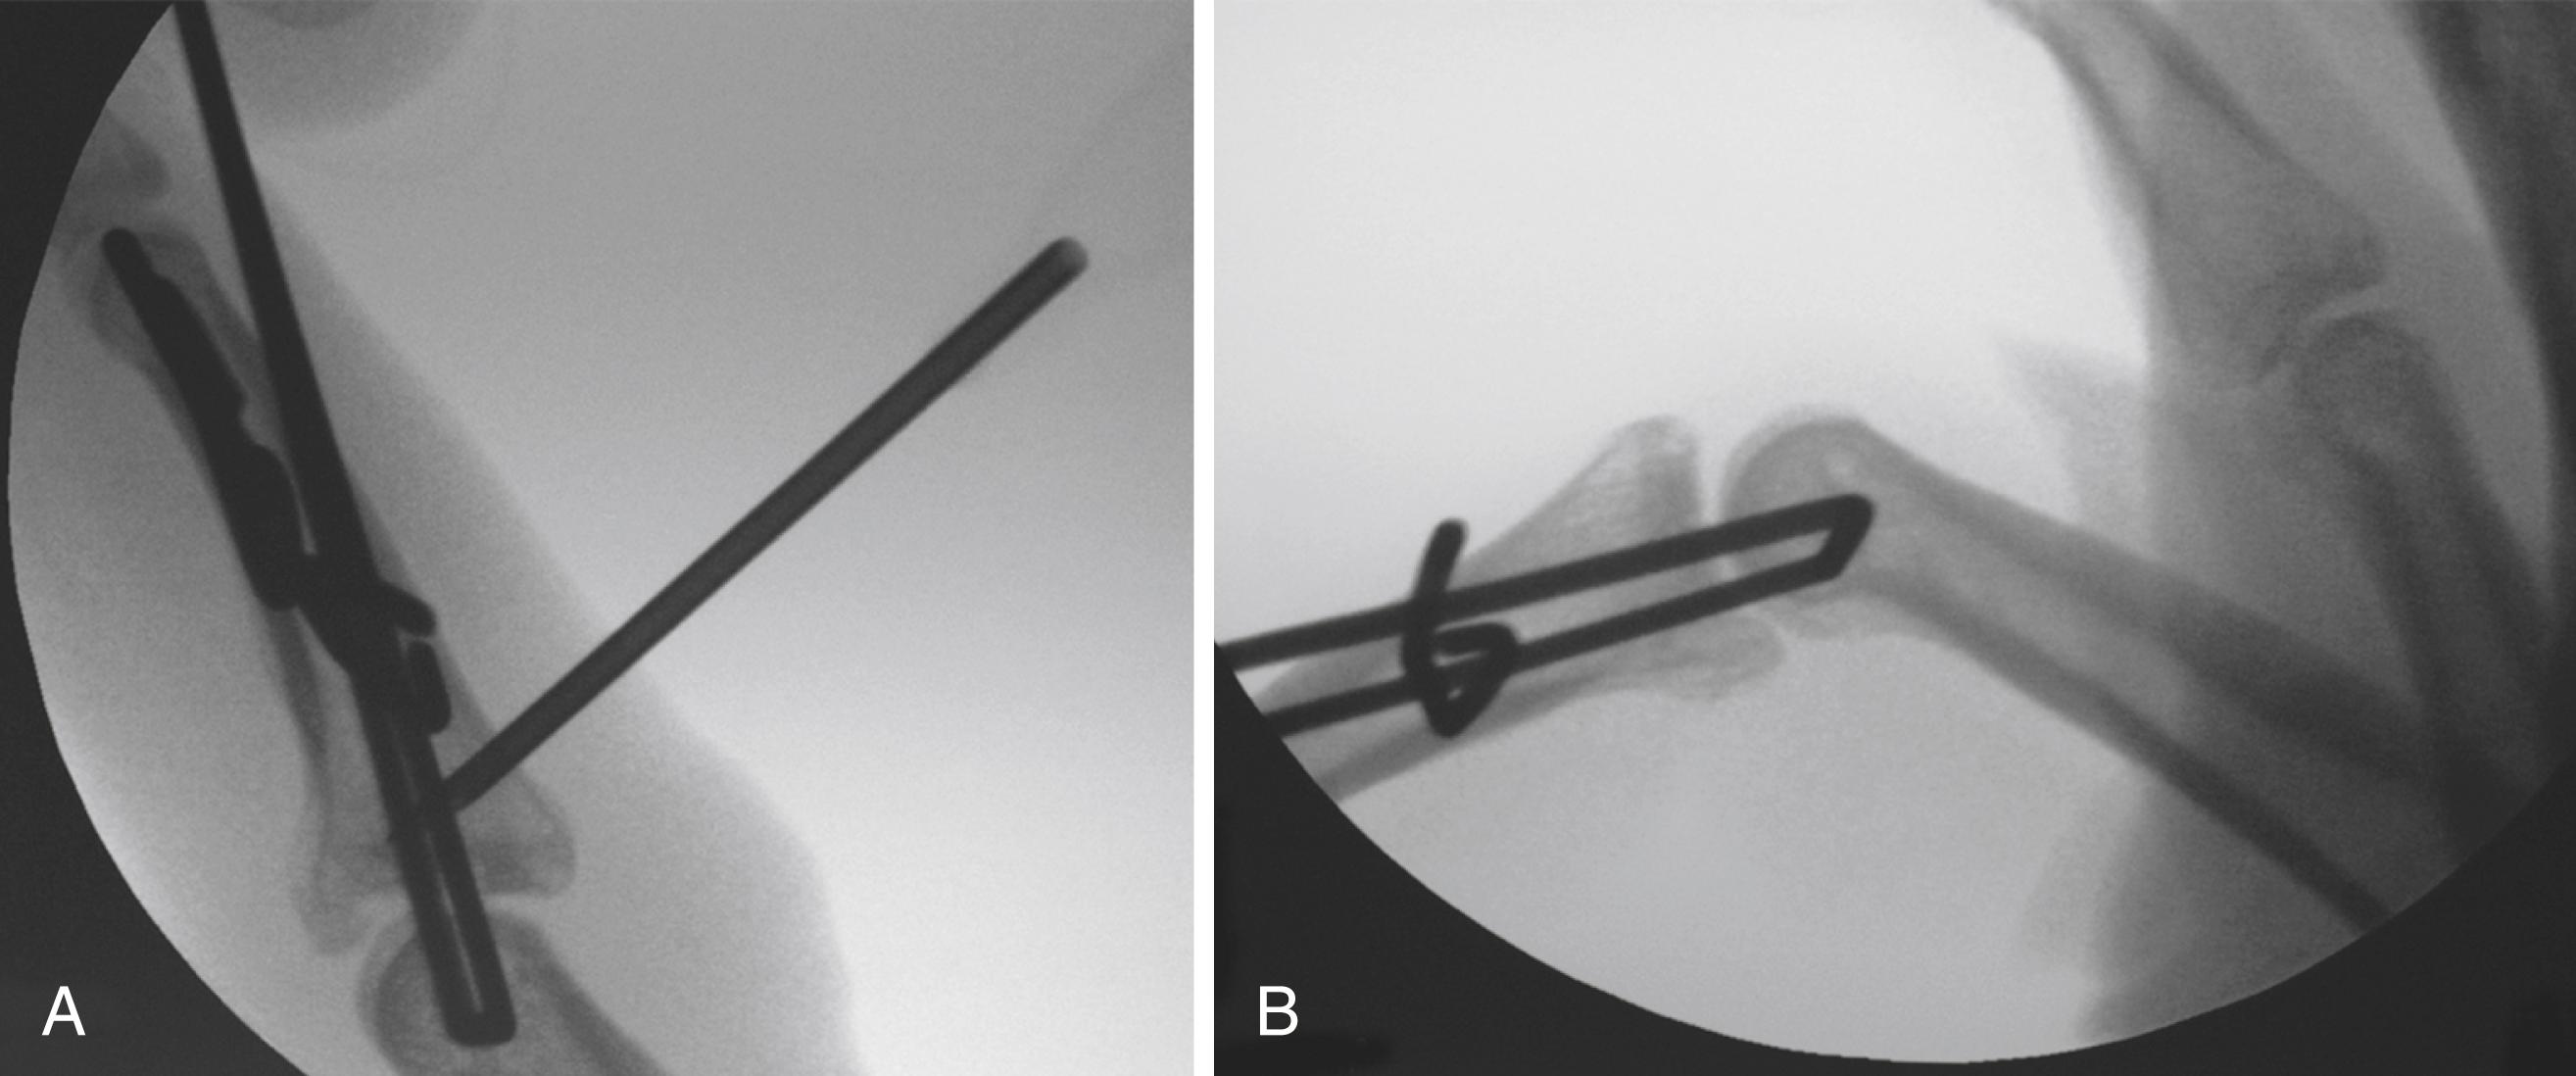 Fig. 8.13, A, Percutaneous introduction of 18-gauge needle to elevated impacted fragments. B, Reduction after tension is applied to the dynamic fixator and joint is reduced percutaneously.